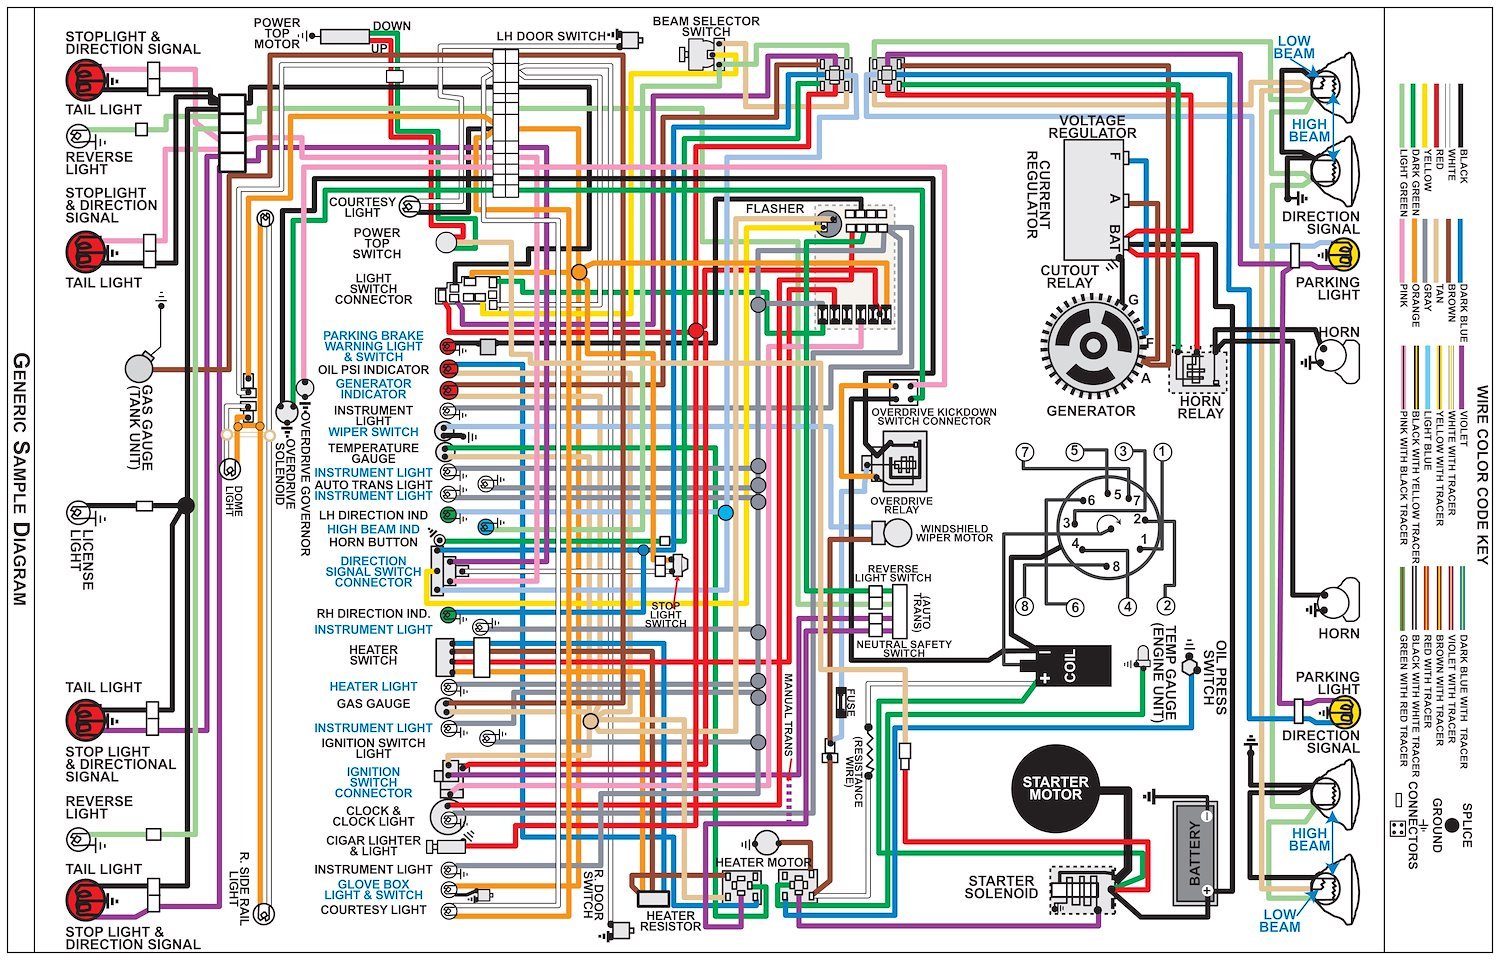 Wiring Diagram for 1958 Ford Car, 11 in x 17 in., Laminated